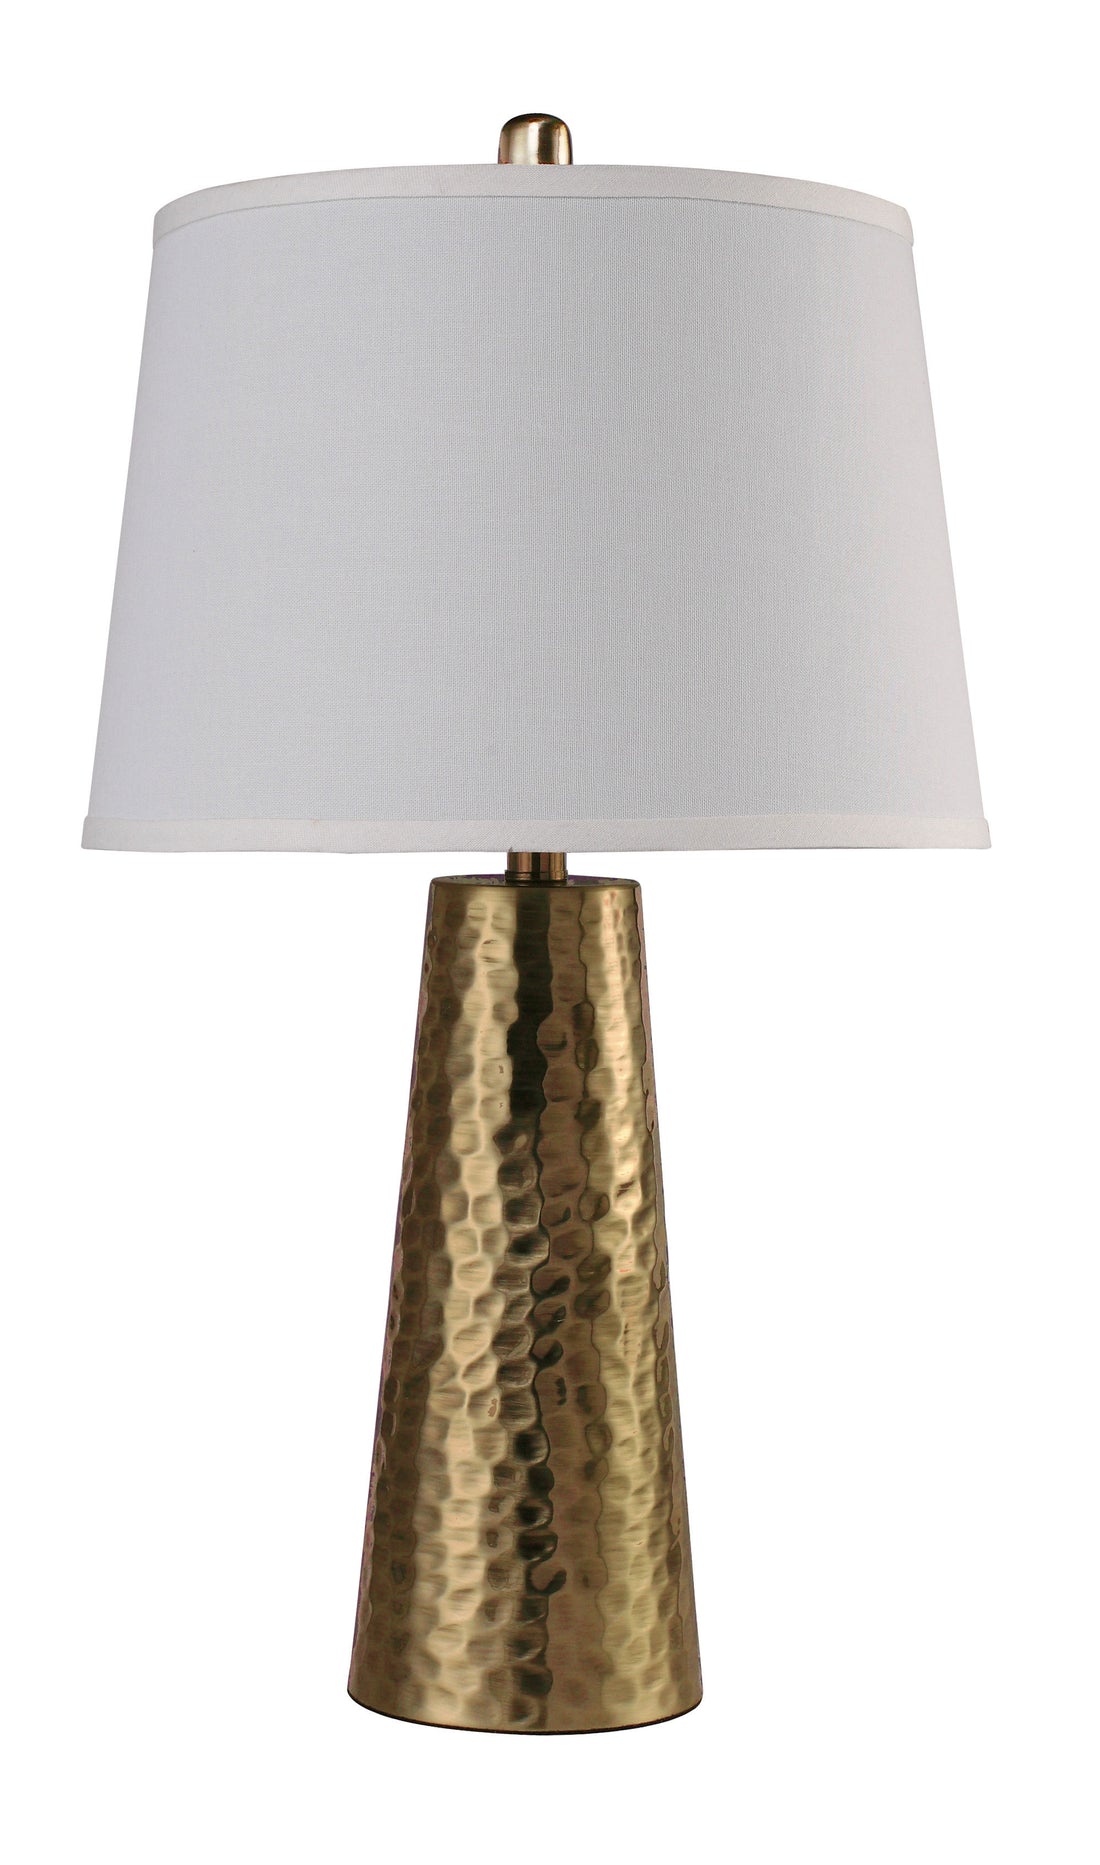 25"h A.b. leaf Hammered Table Lamp 1pc Ctn 2.15